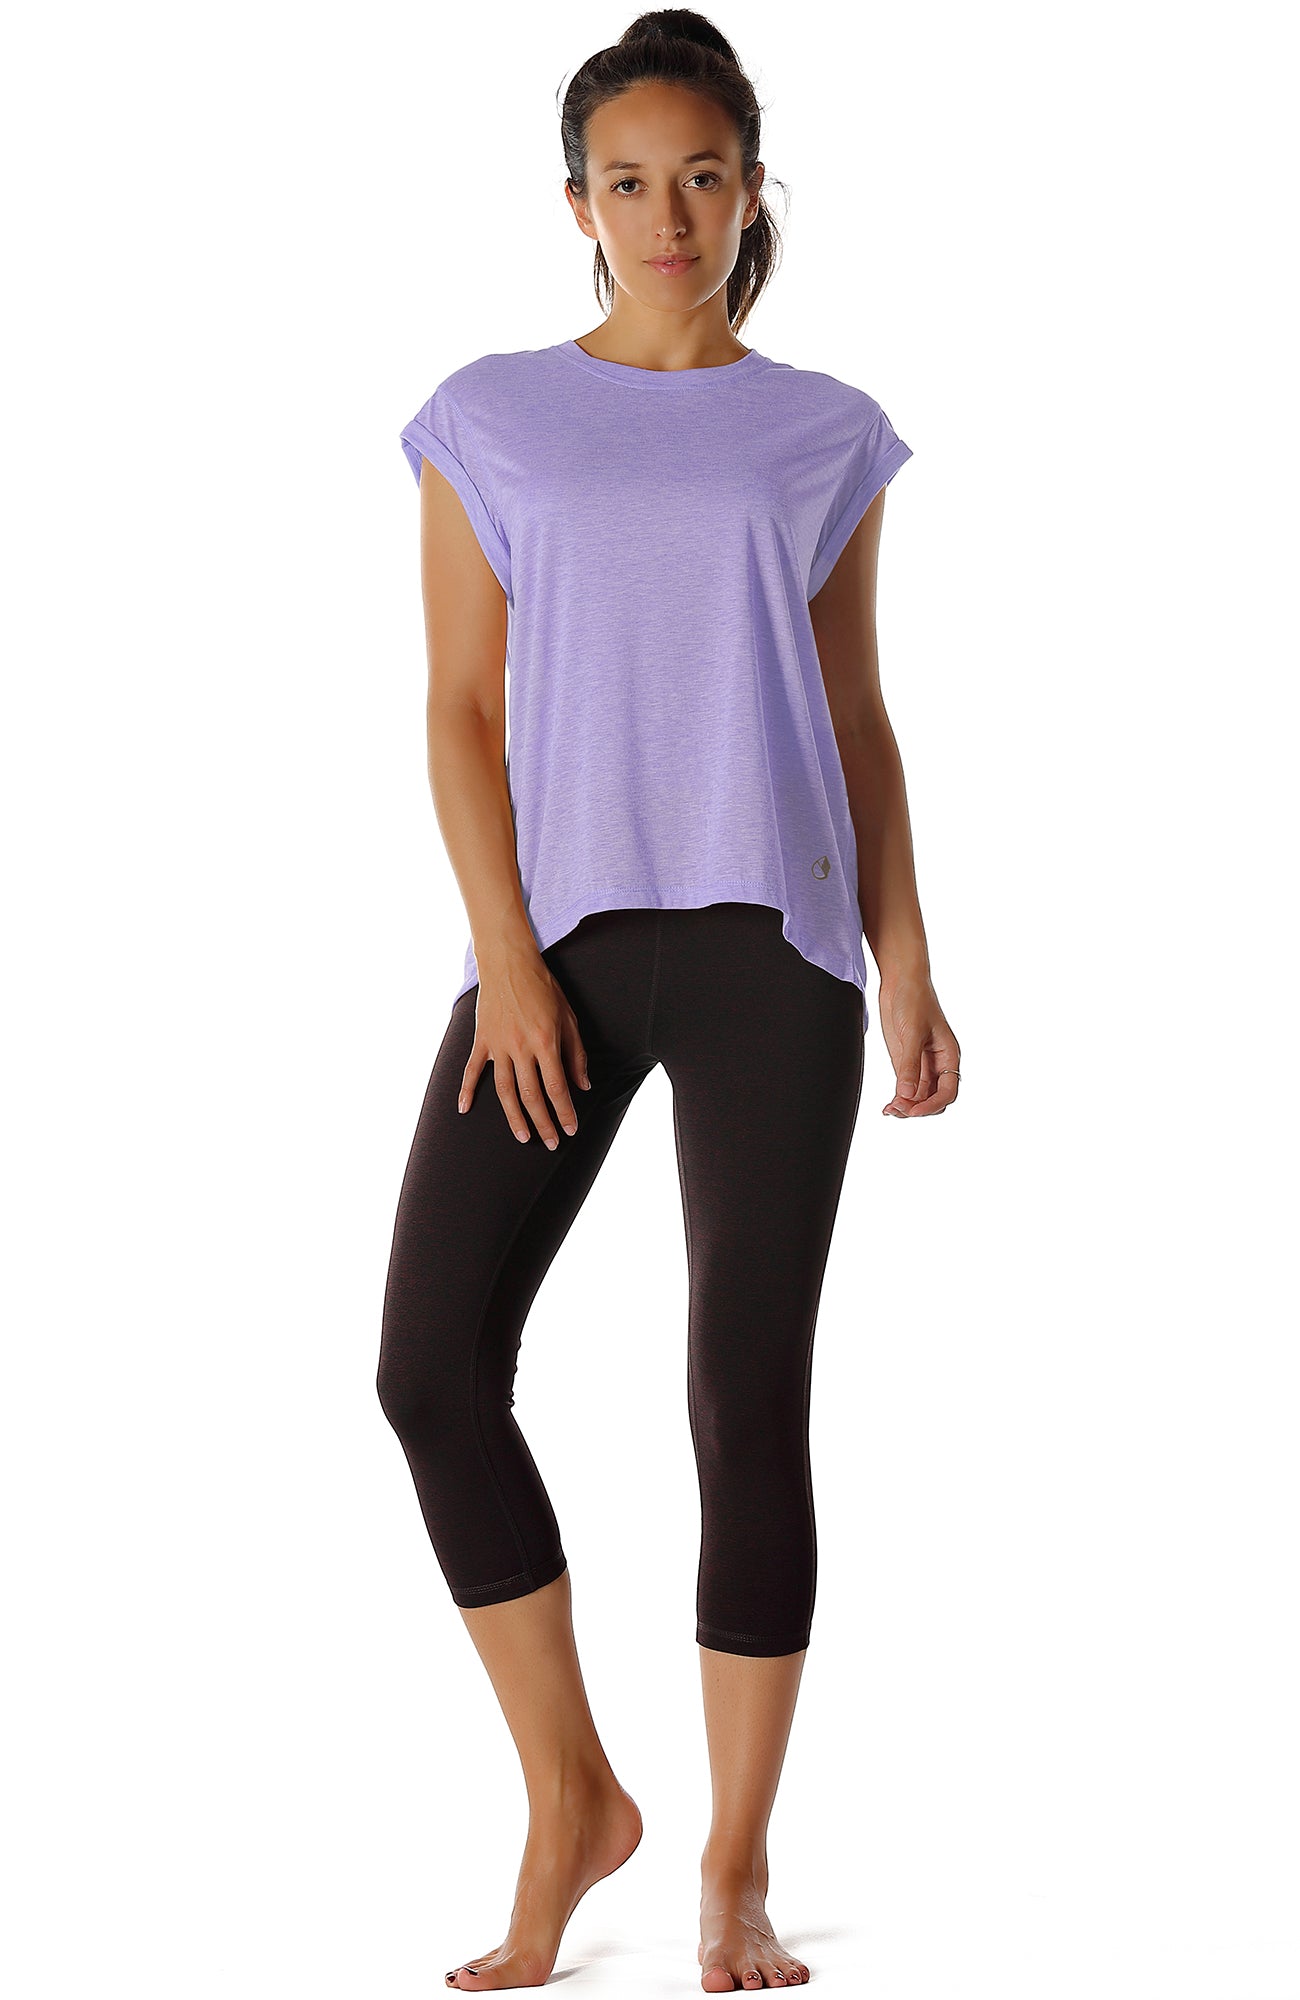 icyzone Long Sleeve Workout Shirts for Women - Open Back Athletic Tops,  Running Yoga Shirts with Thumb Holes